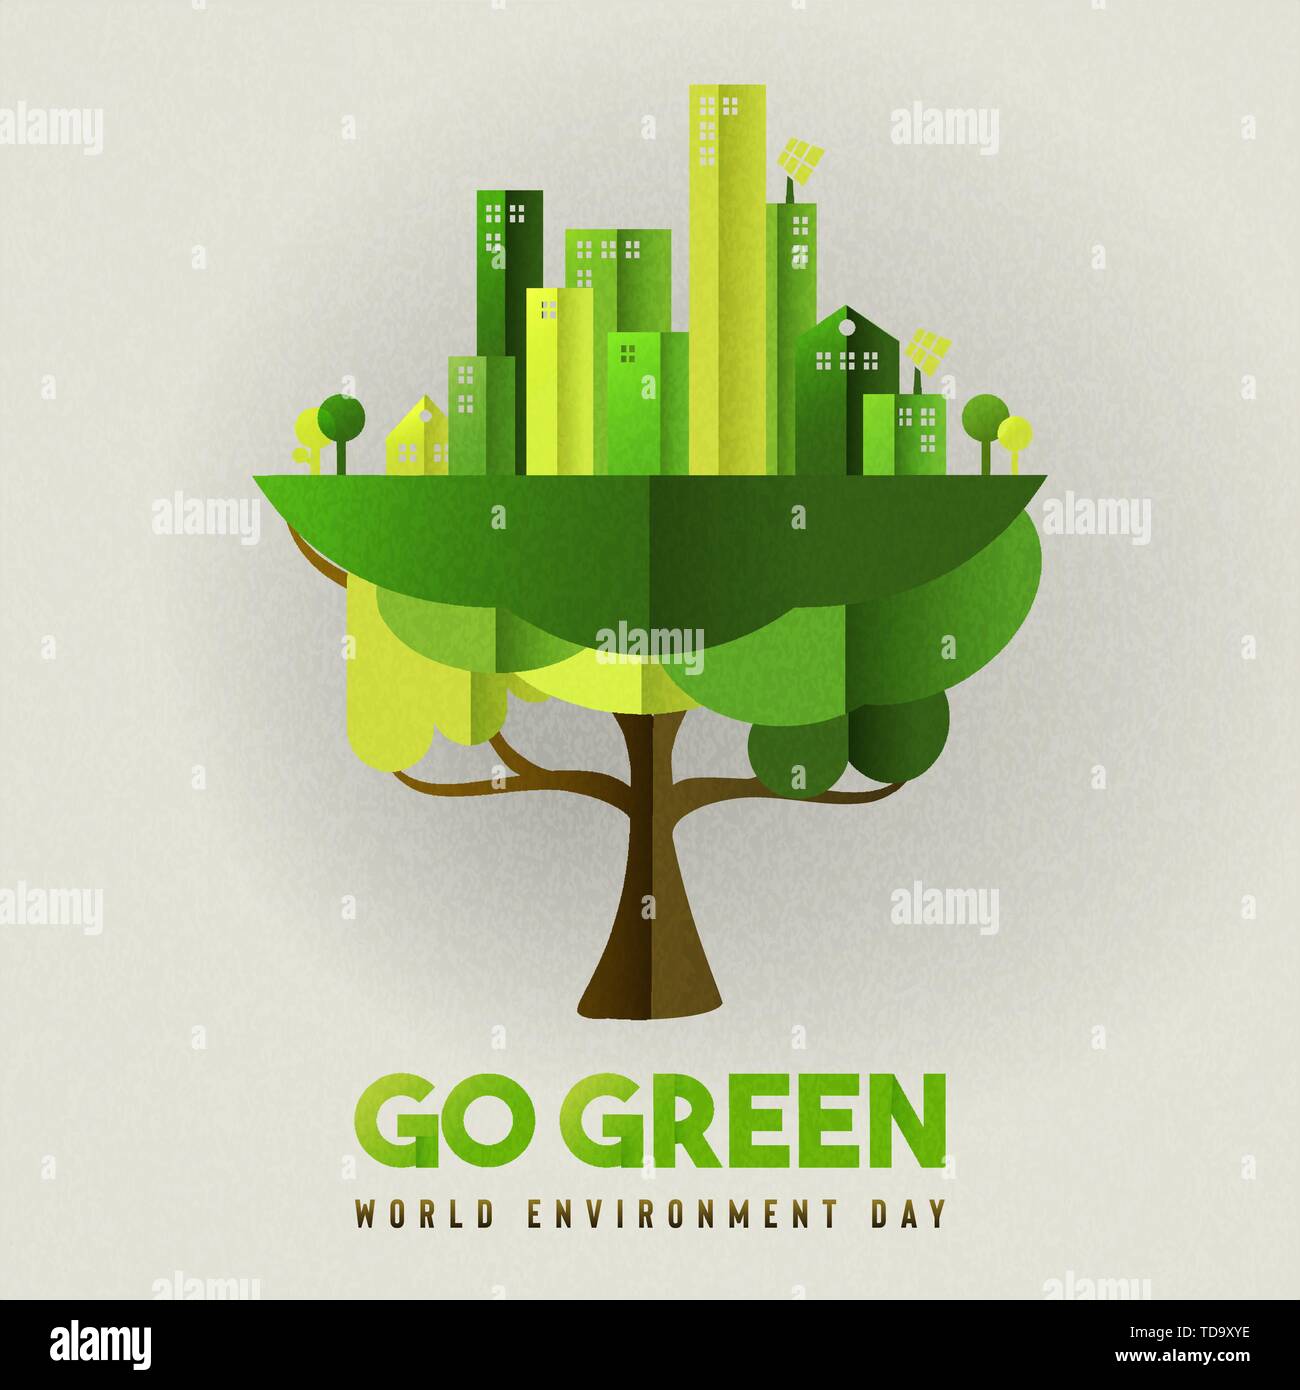 World Environment Day illustration for ecology concept. Eco friendly green city growing from tree. Stock Vector